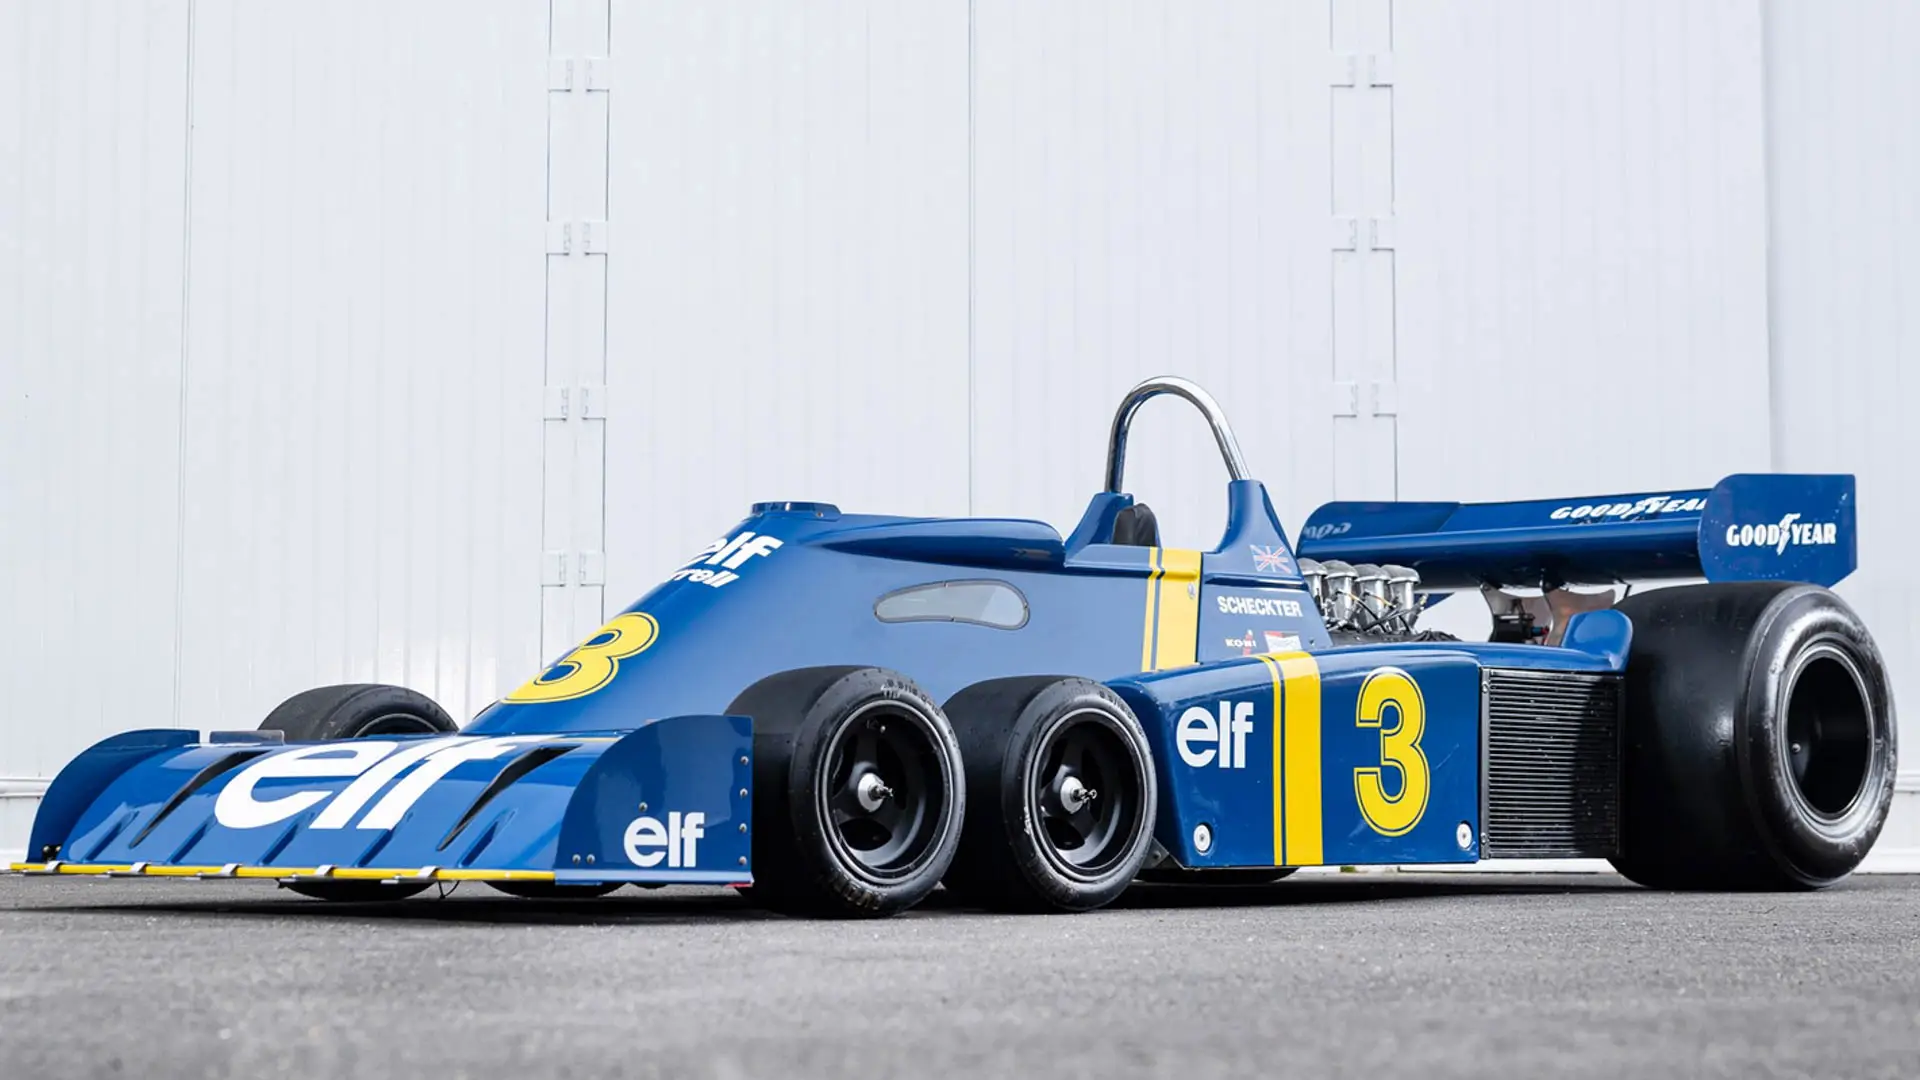 An old Formula One car called the Tyrrell P34 with six wheels will be sold at auction